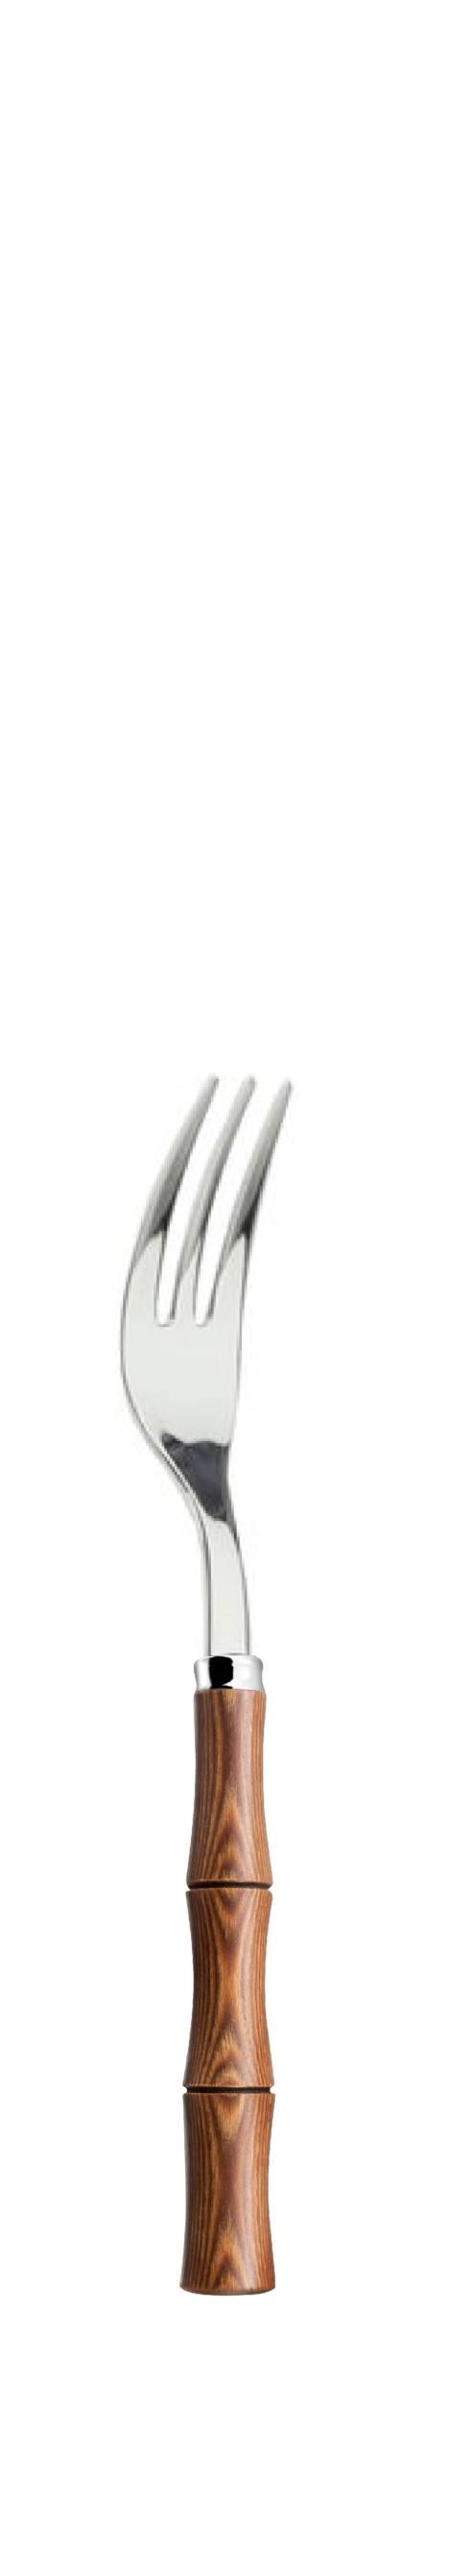 $33.00 Pastry fork